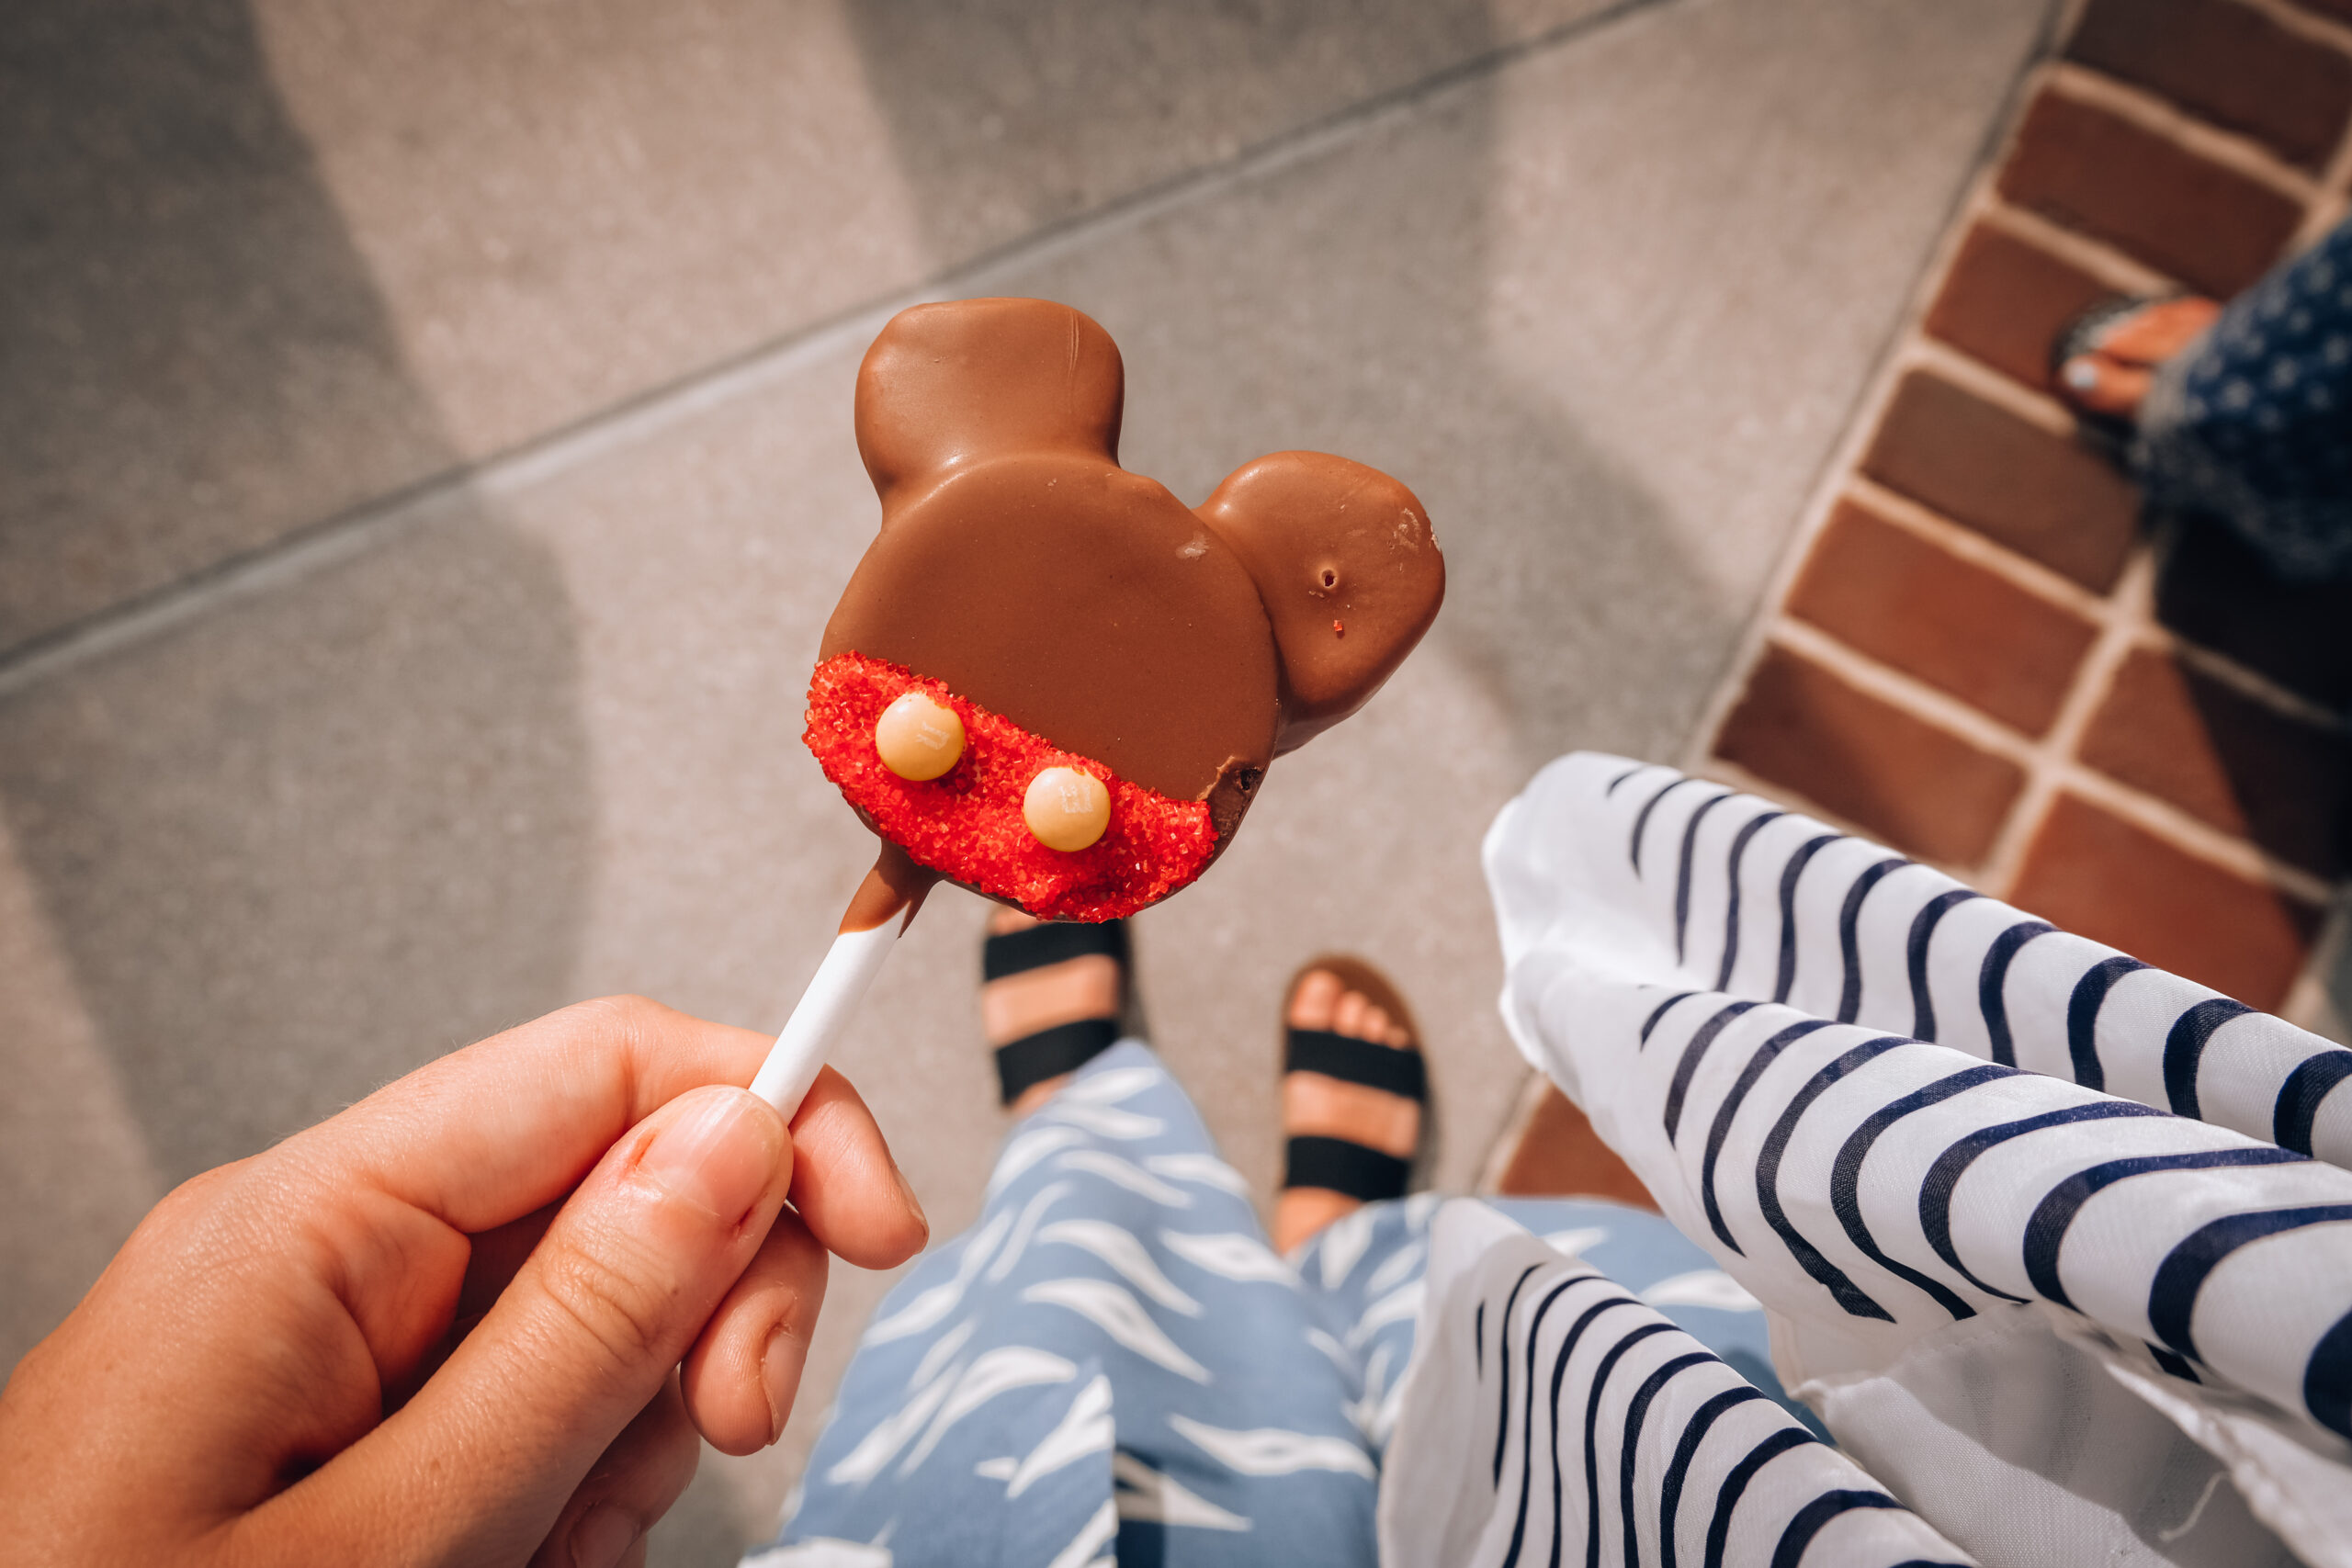 Holding a mickey mouse shaped cake pop